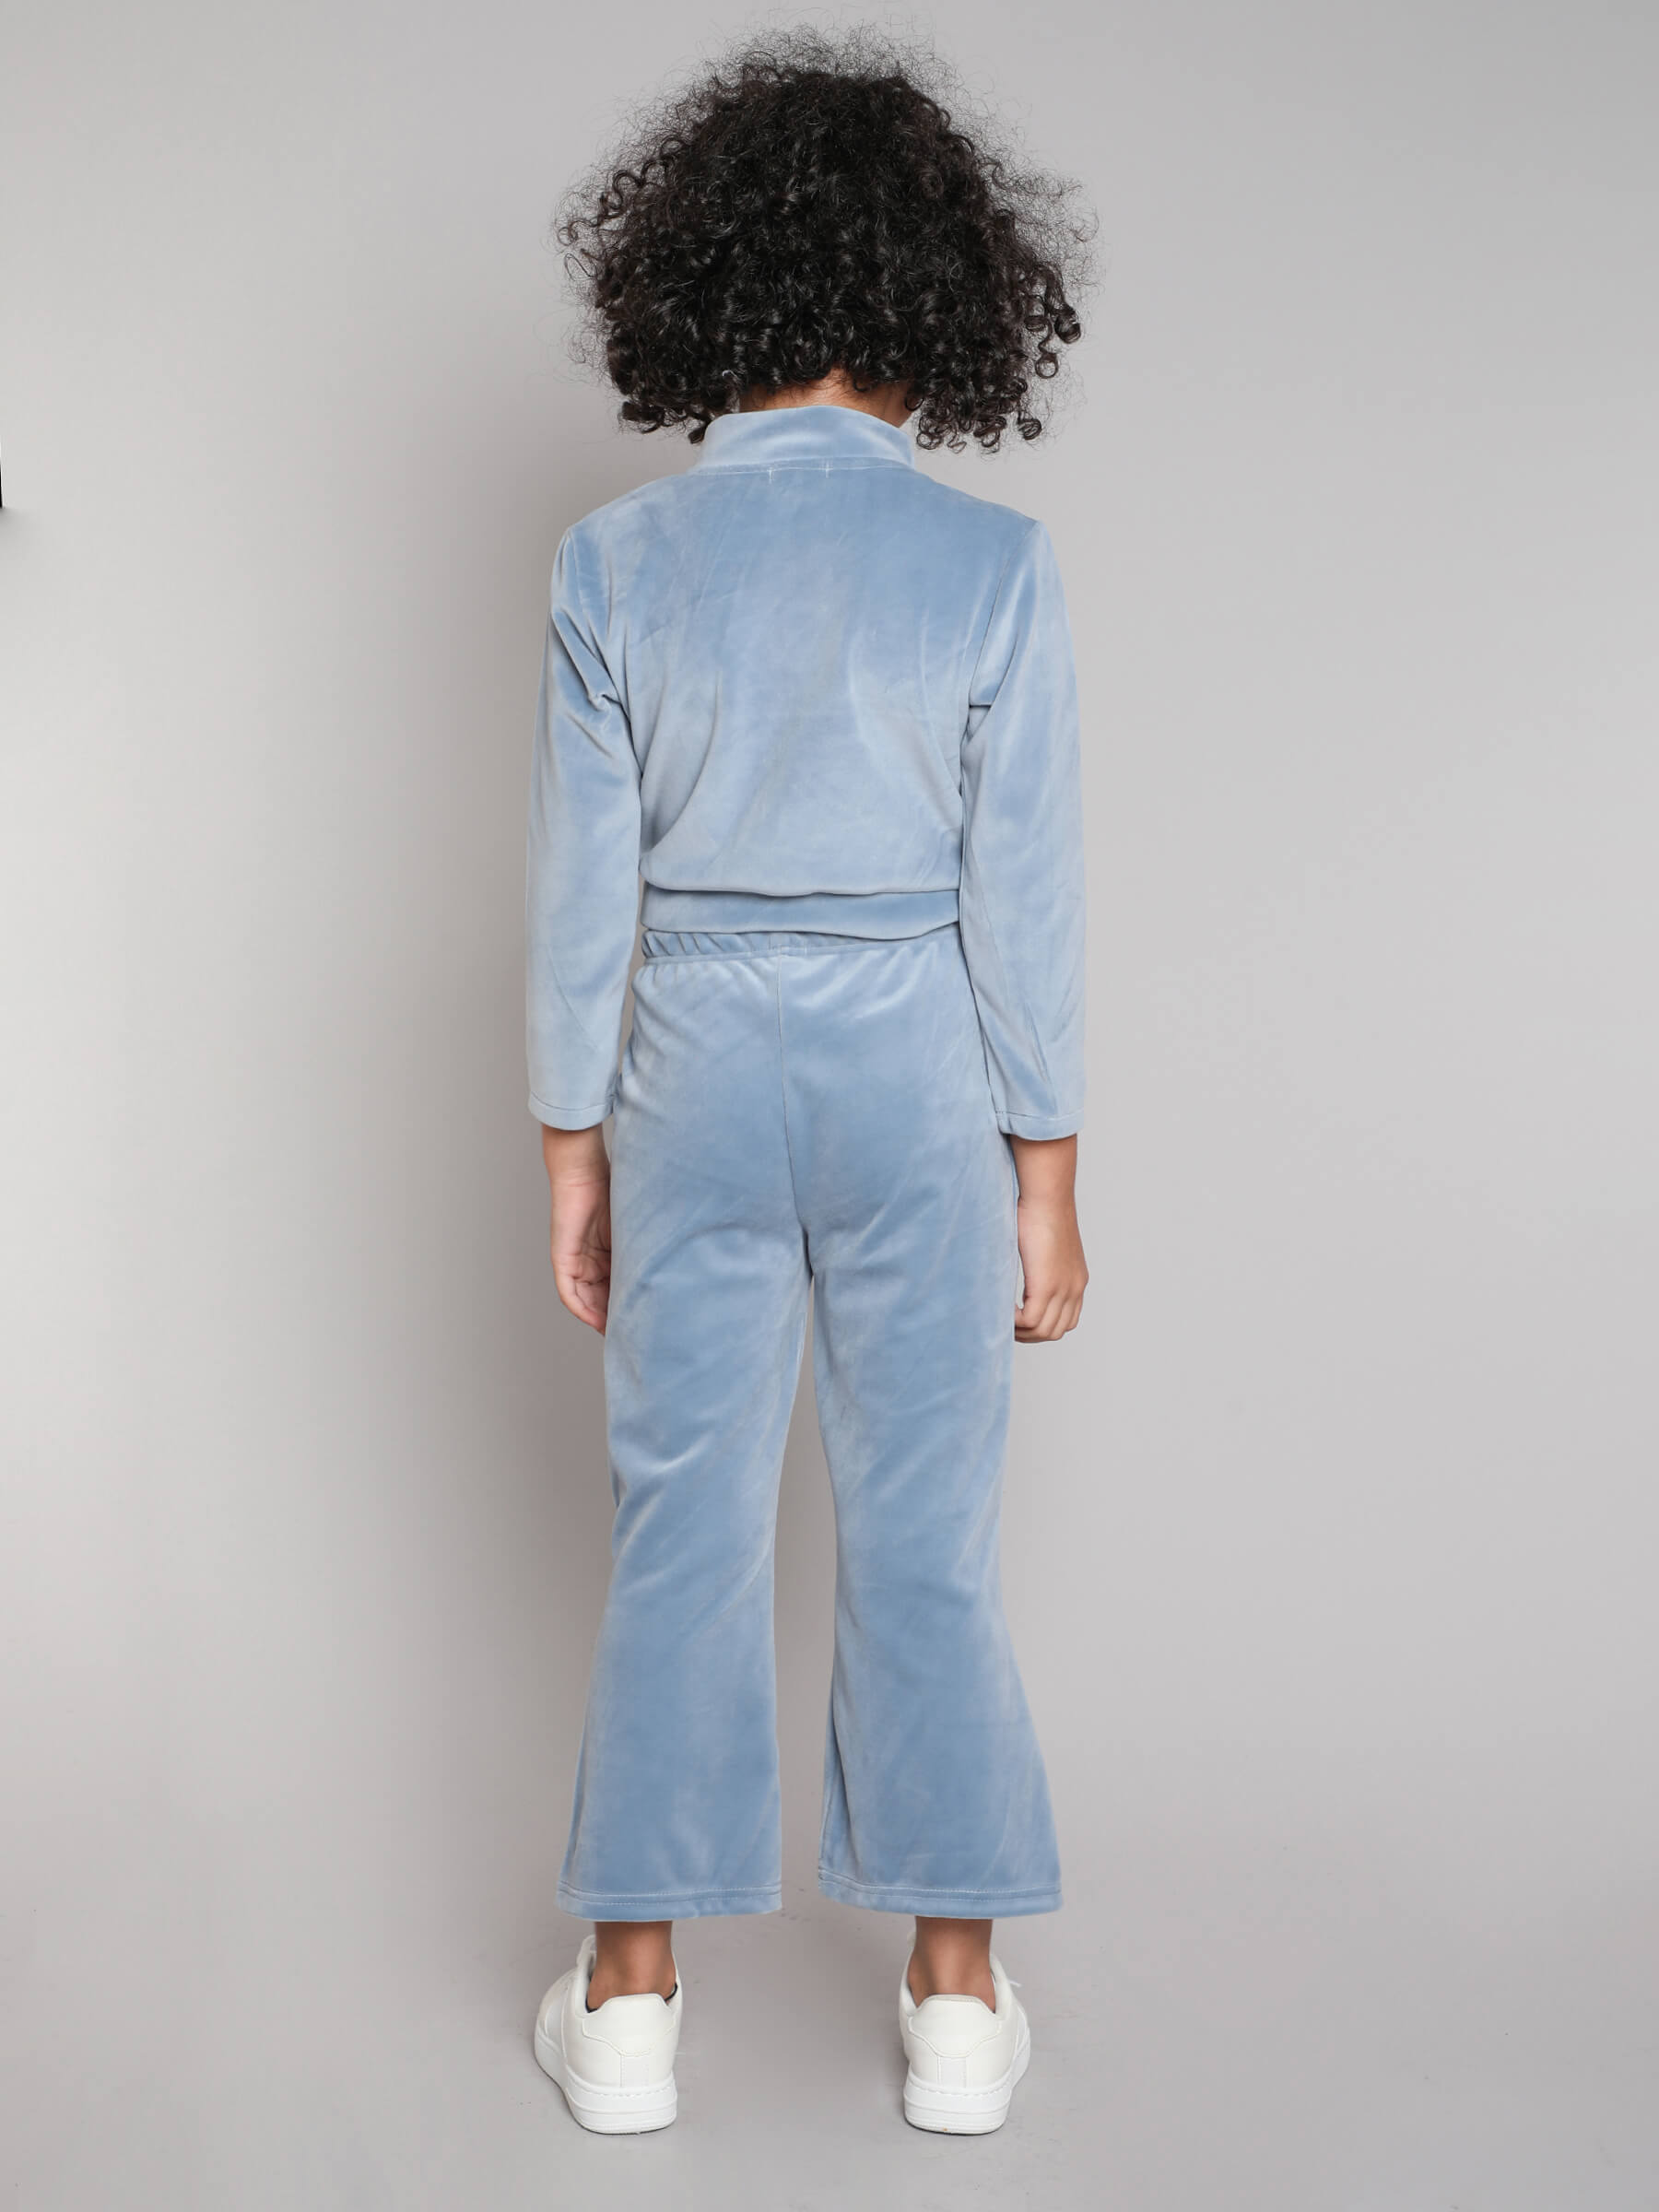 Shop Full Sleeves Zip Up Jacket And Bell Bottom Pant Set-Ice Blue Online